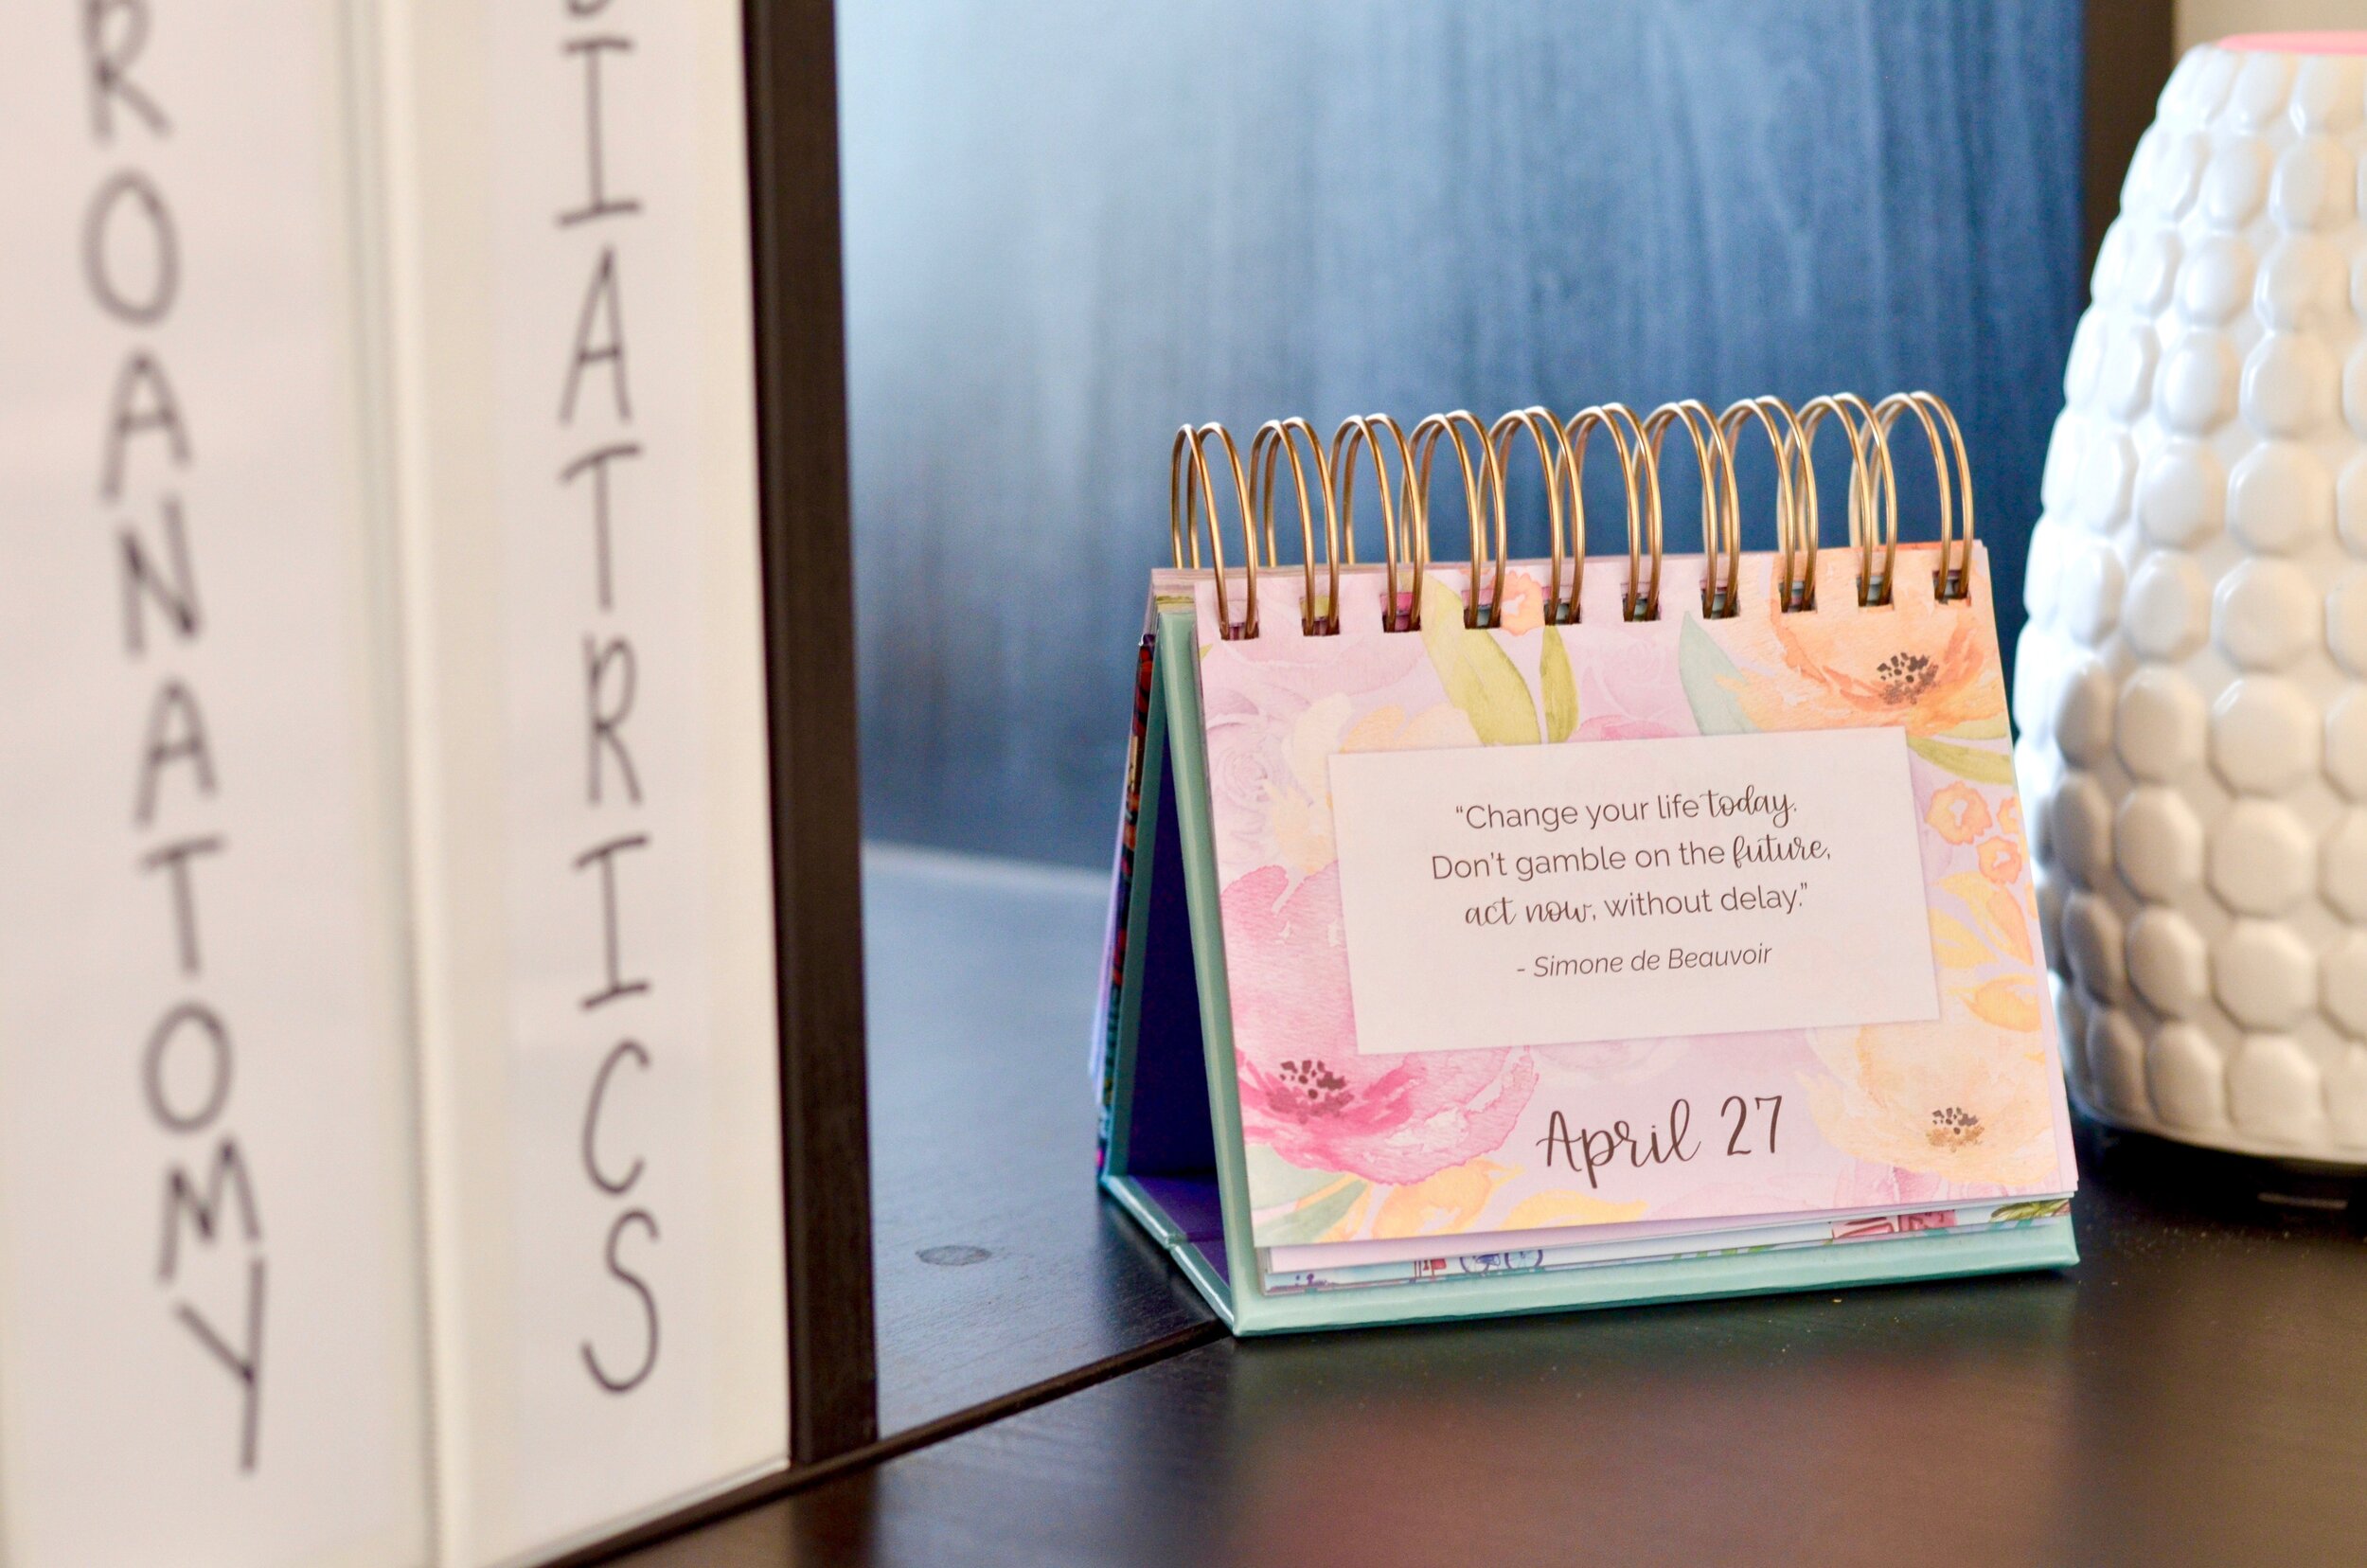 Home Office Tour // Desk Inspo, Study Essentials, and Notes Organization! —  Breanna Spain Blog